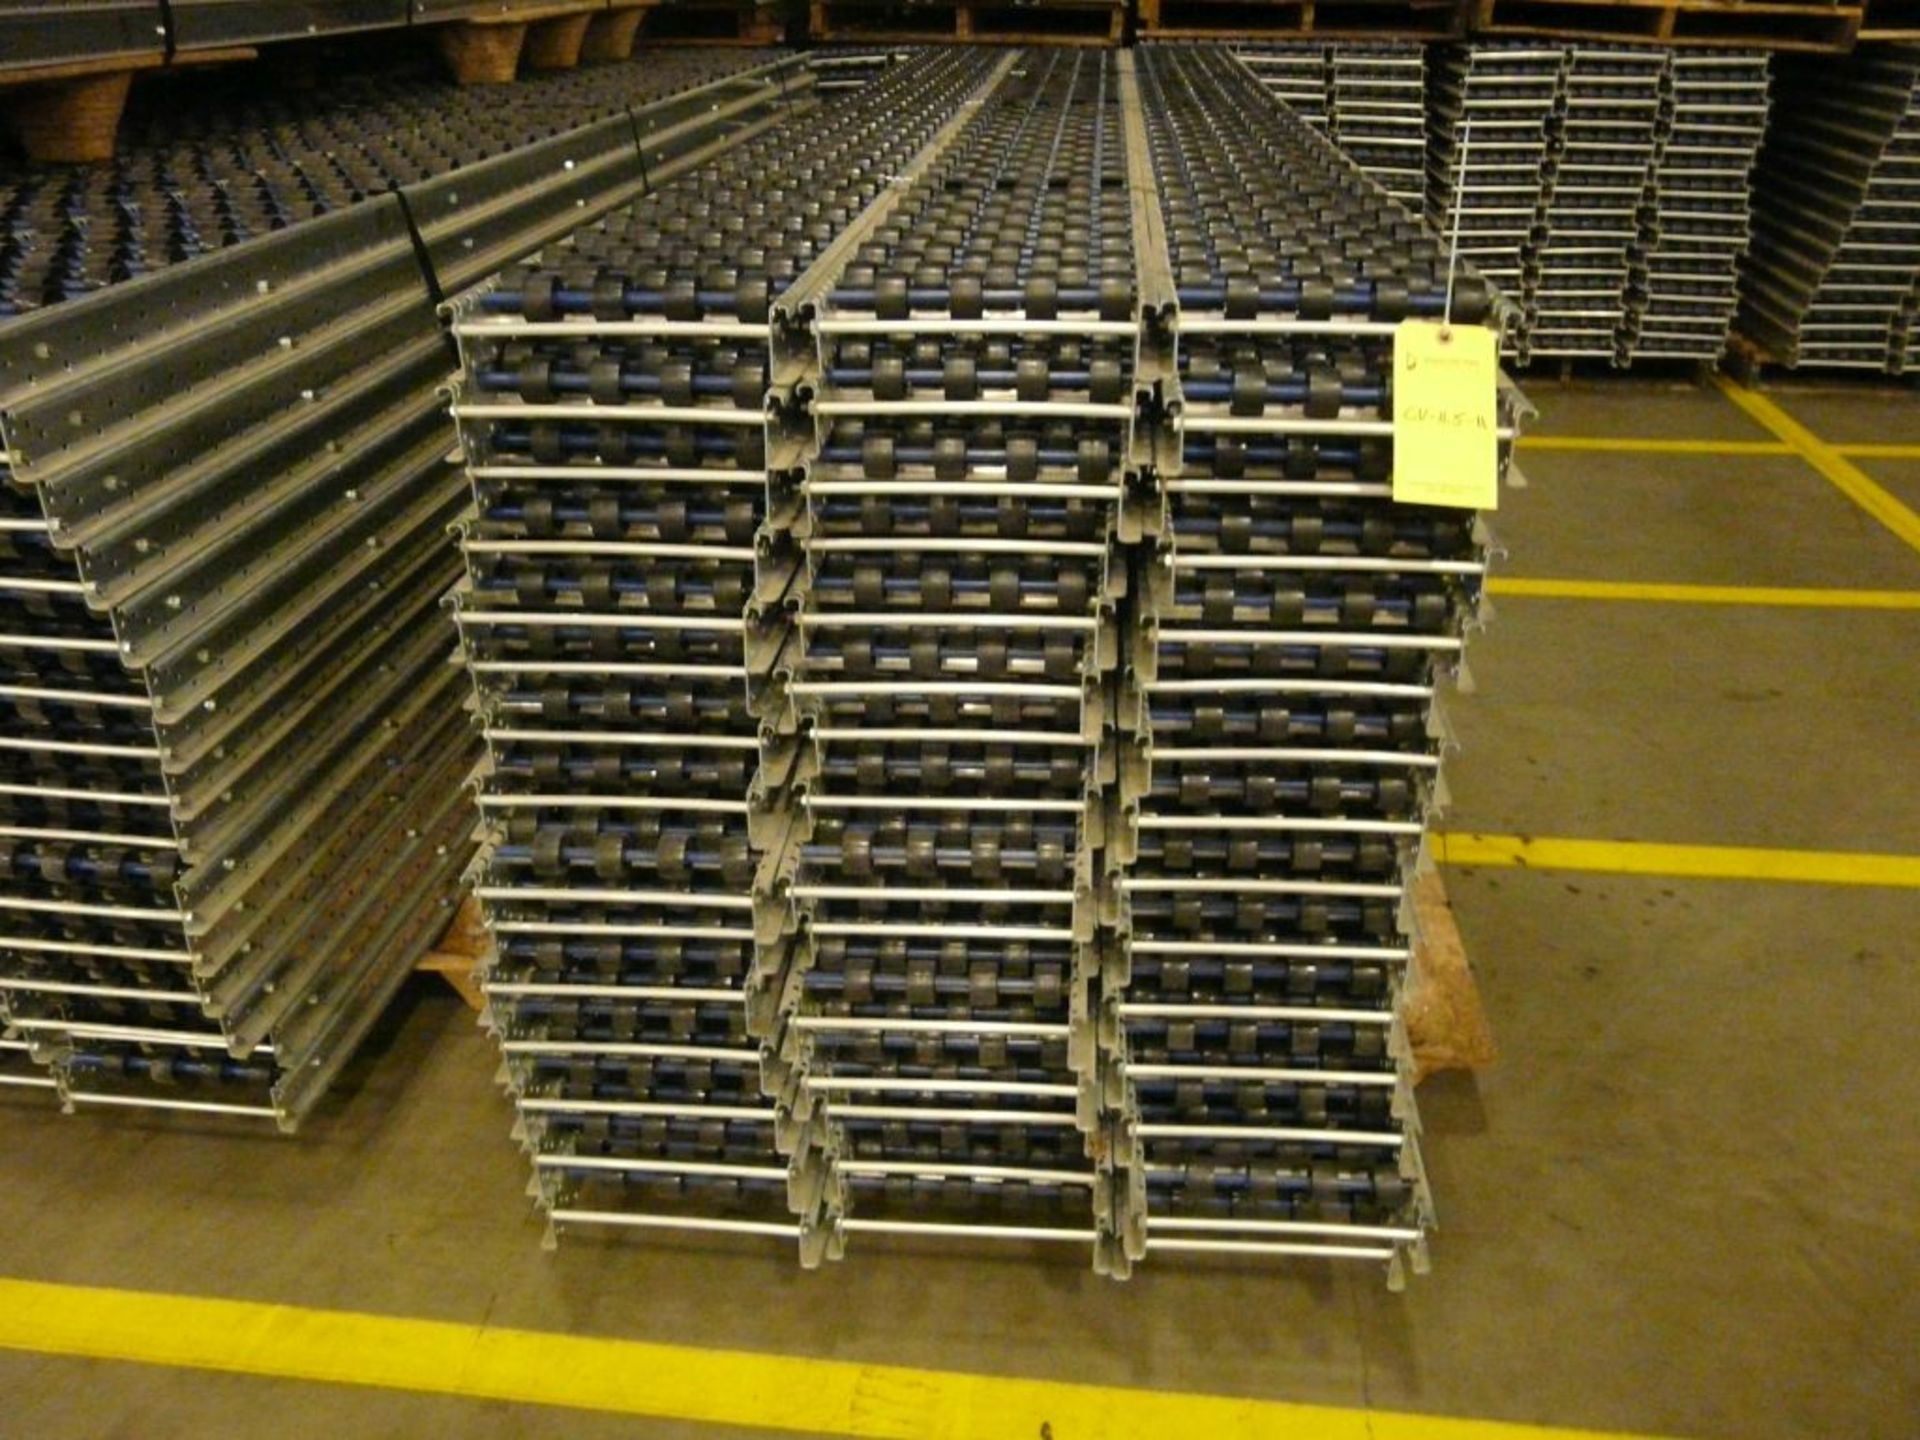 Lot of (90) SpanTrack Wheelbed Carton Flow Conveyors - 11.5'L x 11"W; Tag: 224221 - $30 Lot - Image 2 of 4